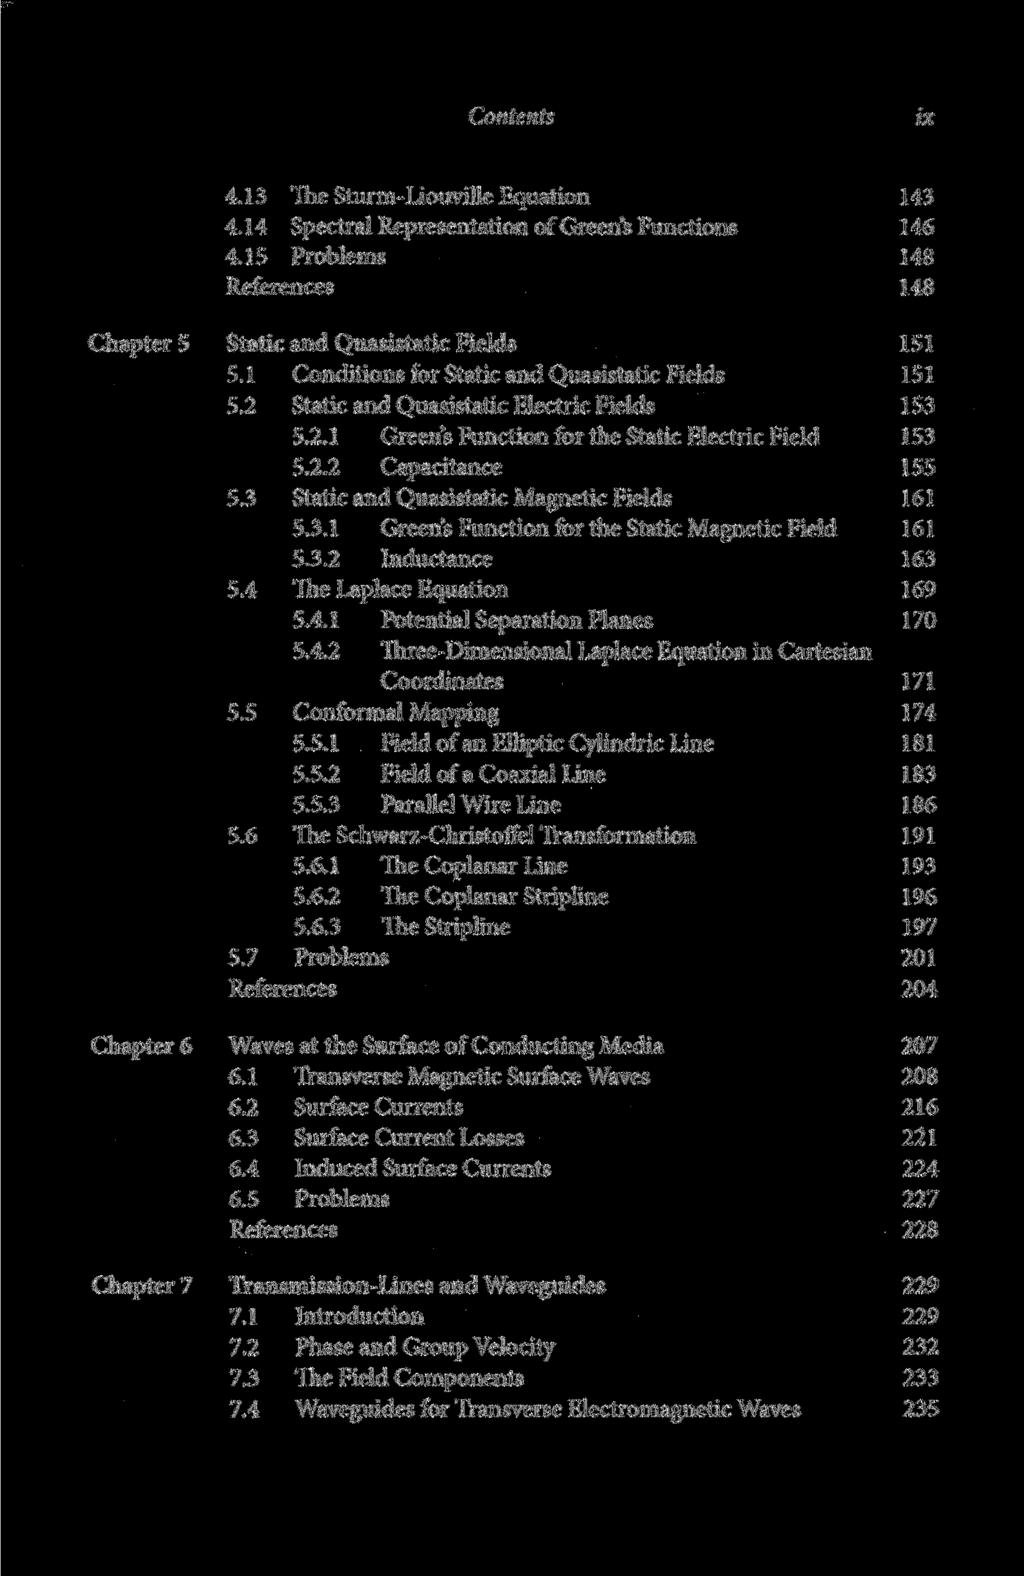 Contents ix 4.13 The Sturm-Liouville Equation 143 4.14 Spectral Representation of Green's Functions 146 4.15 Problems 148 References 148 Chapter 5 Static and Quasistatic Fields 151 5.